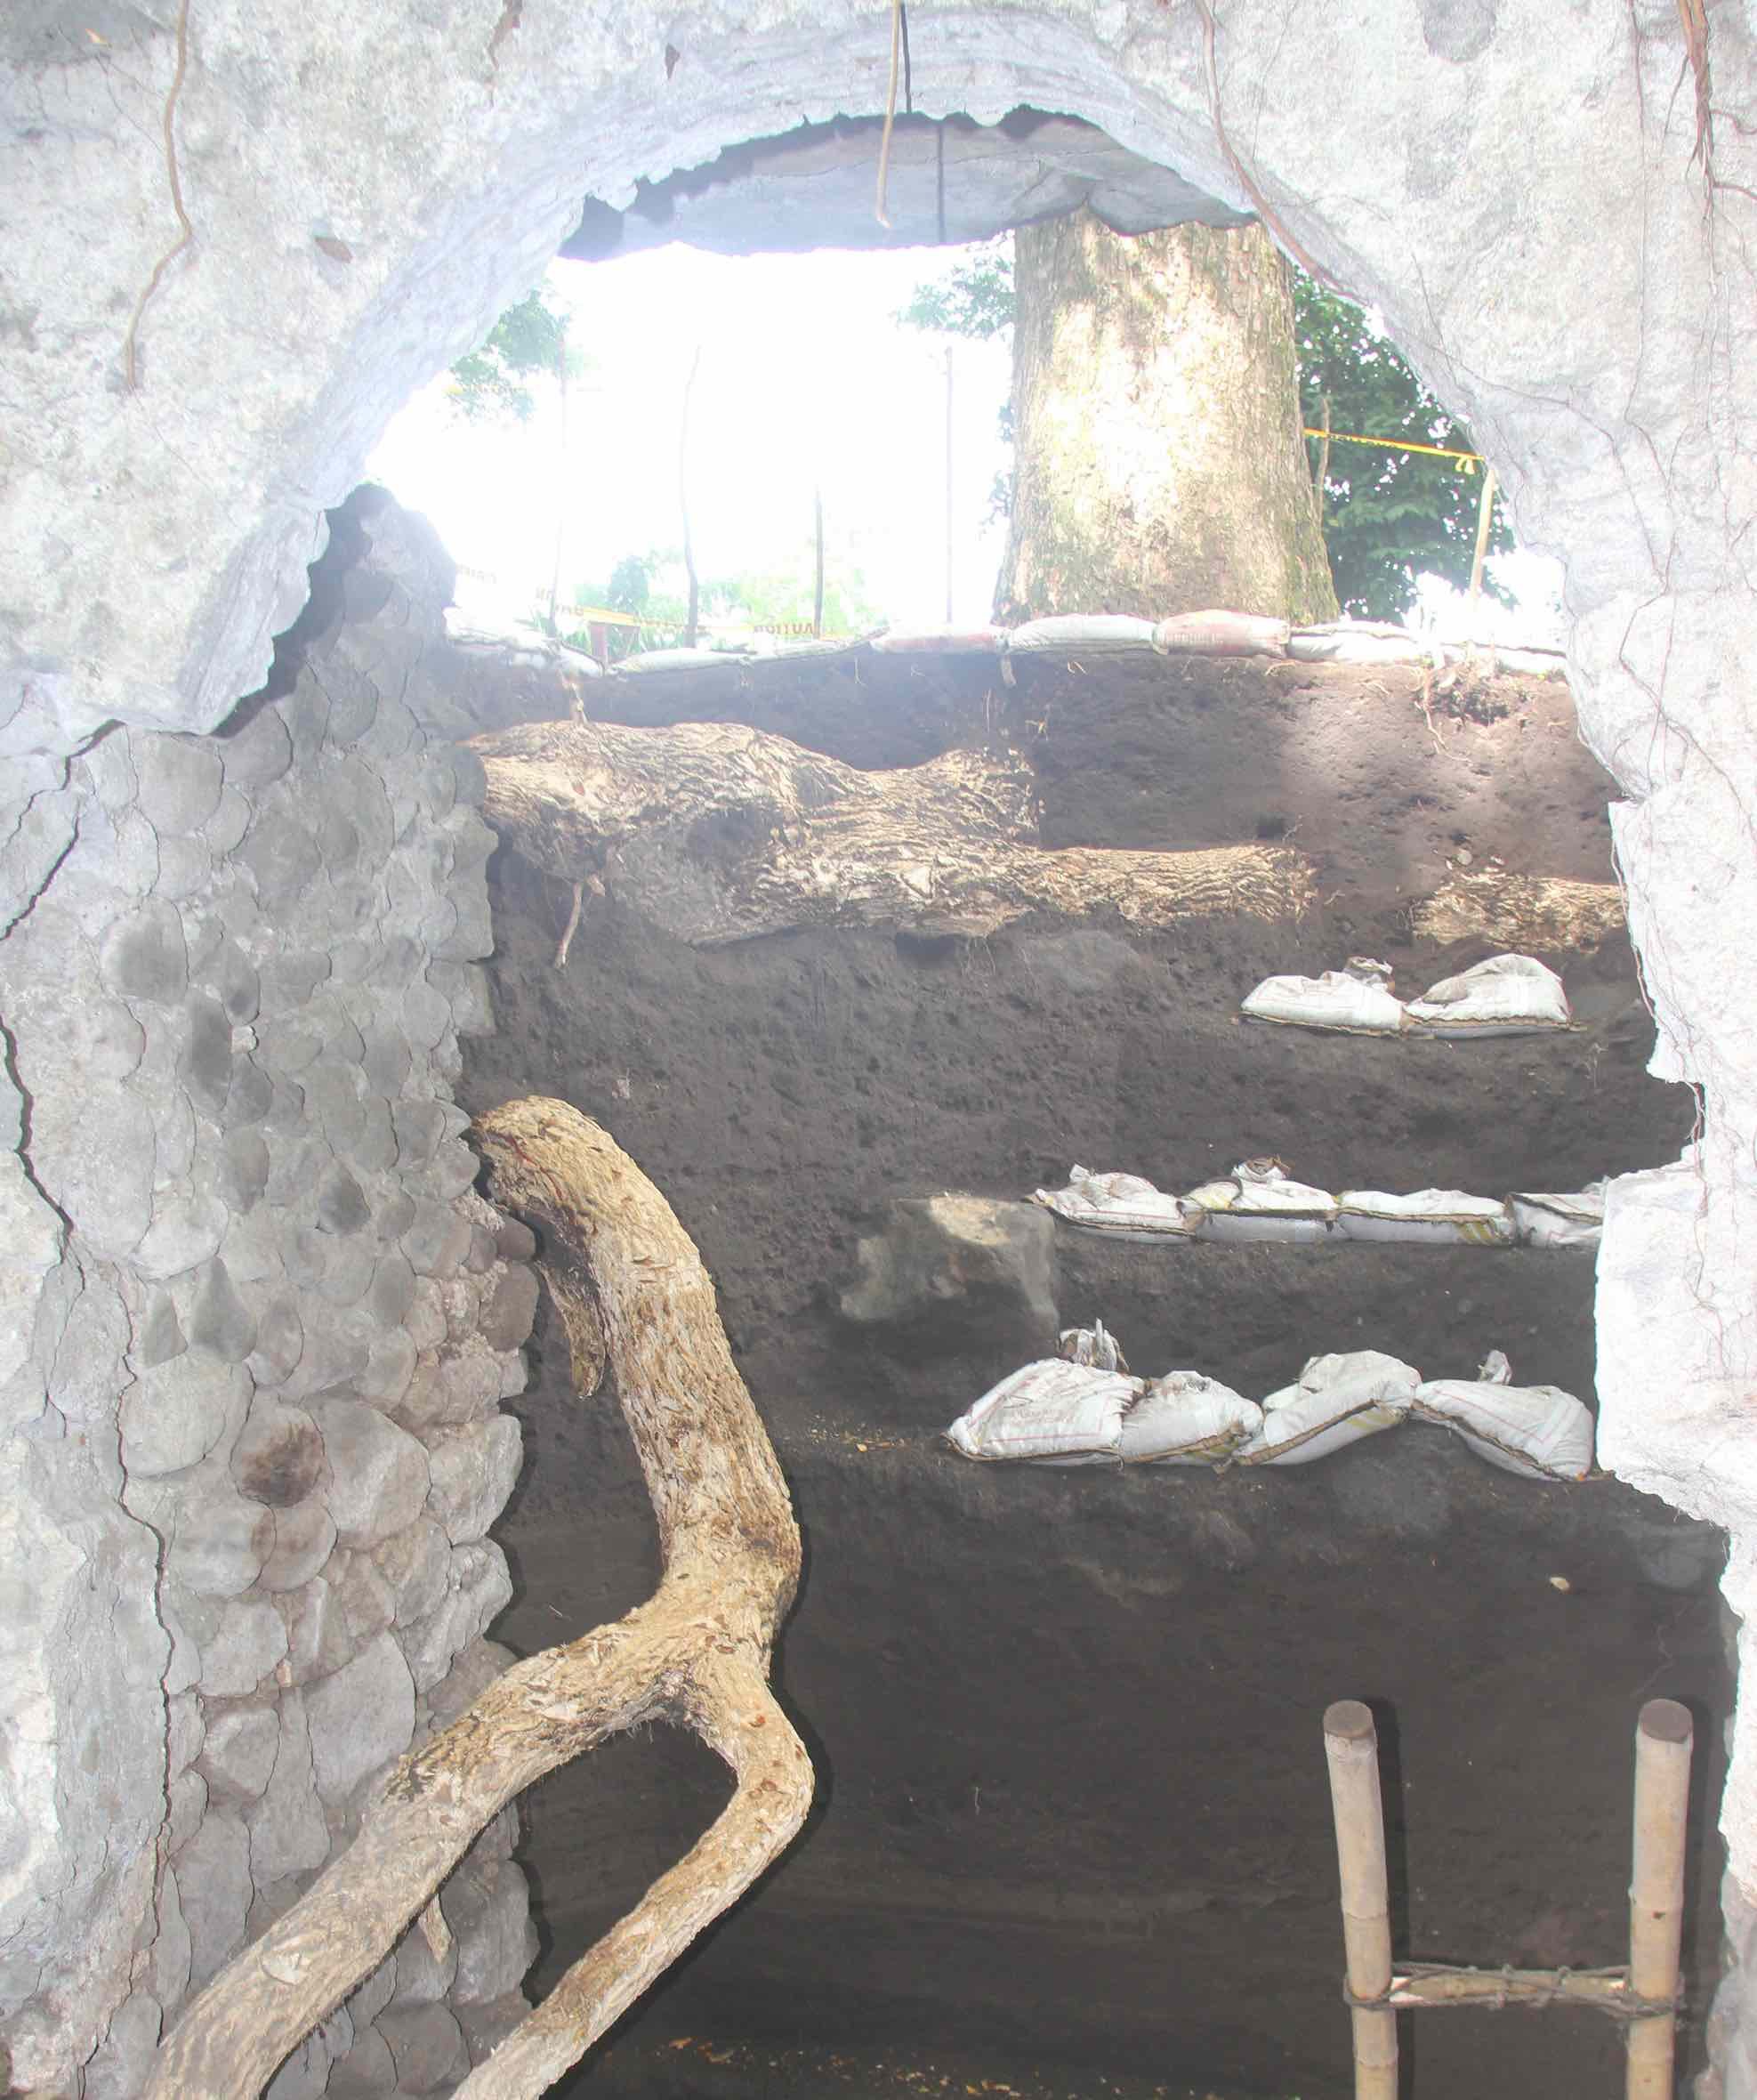 Budiao Church ruins excavated after more than 200 years